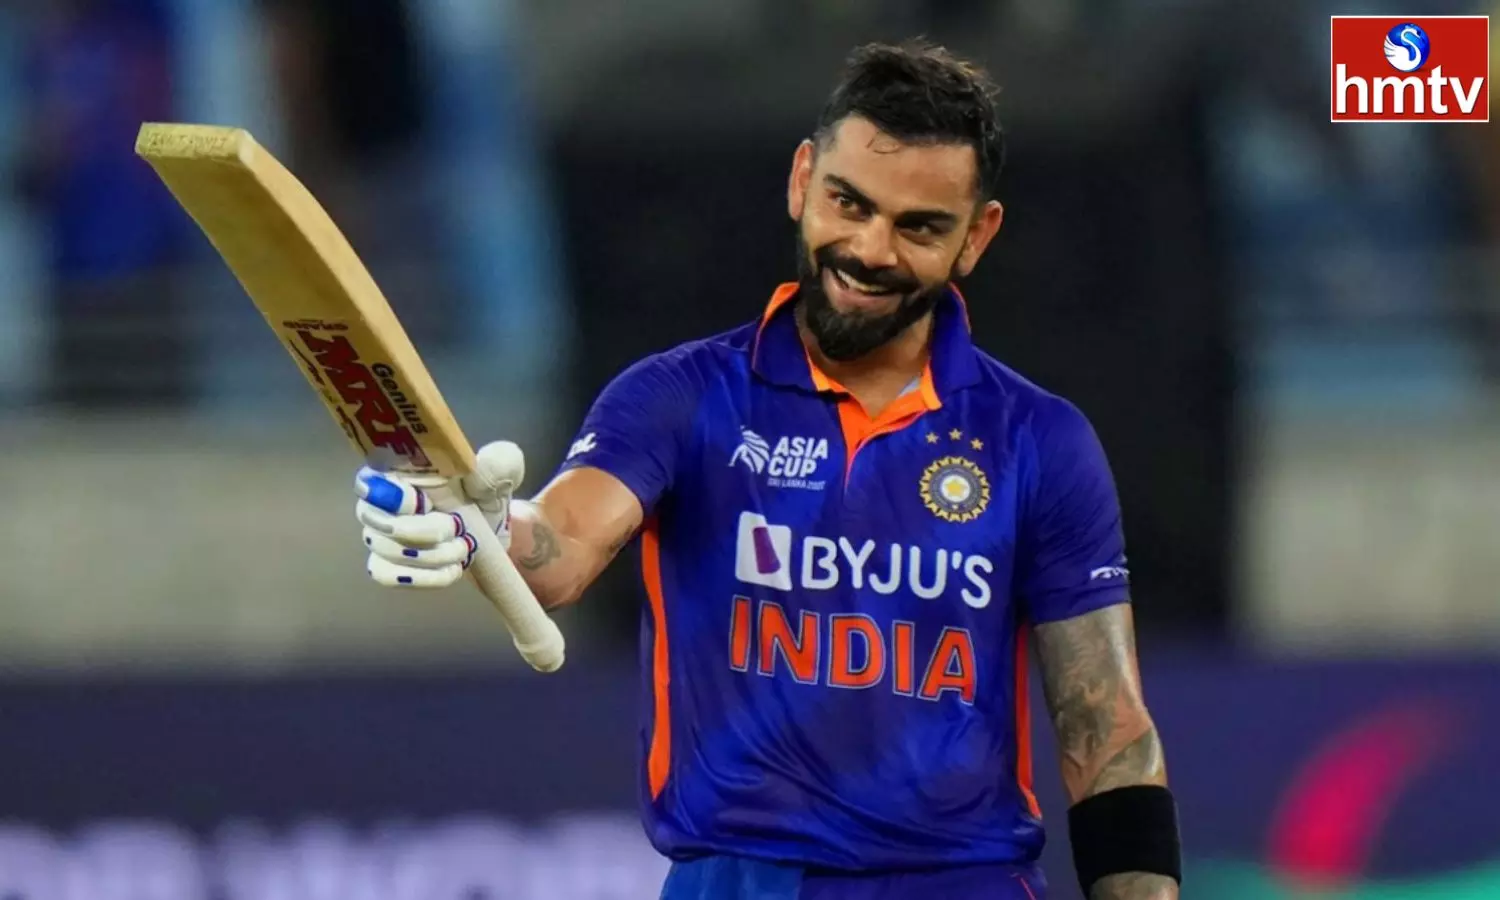 The Board of Control for Cricket in India is not happy With a Photo Shared by Virat Kohli